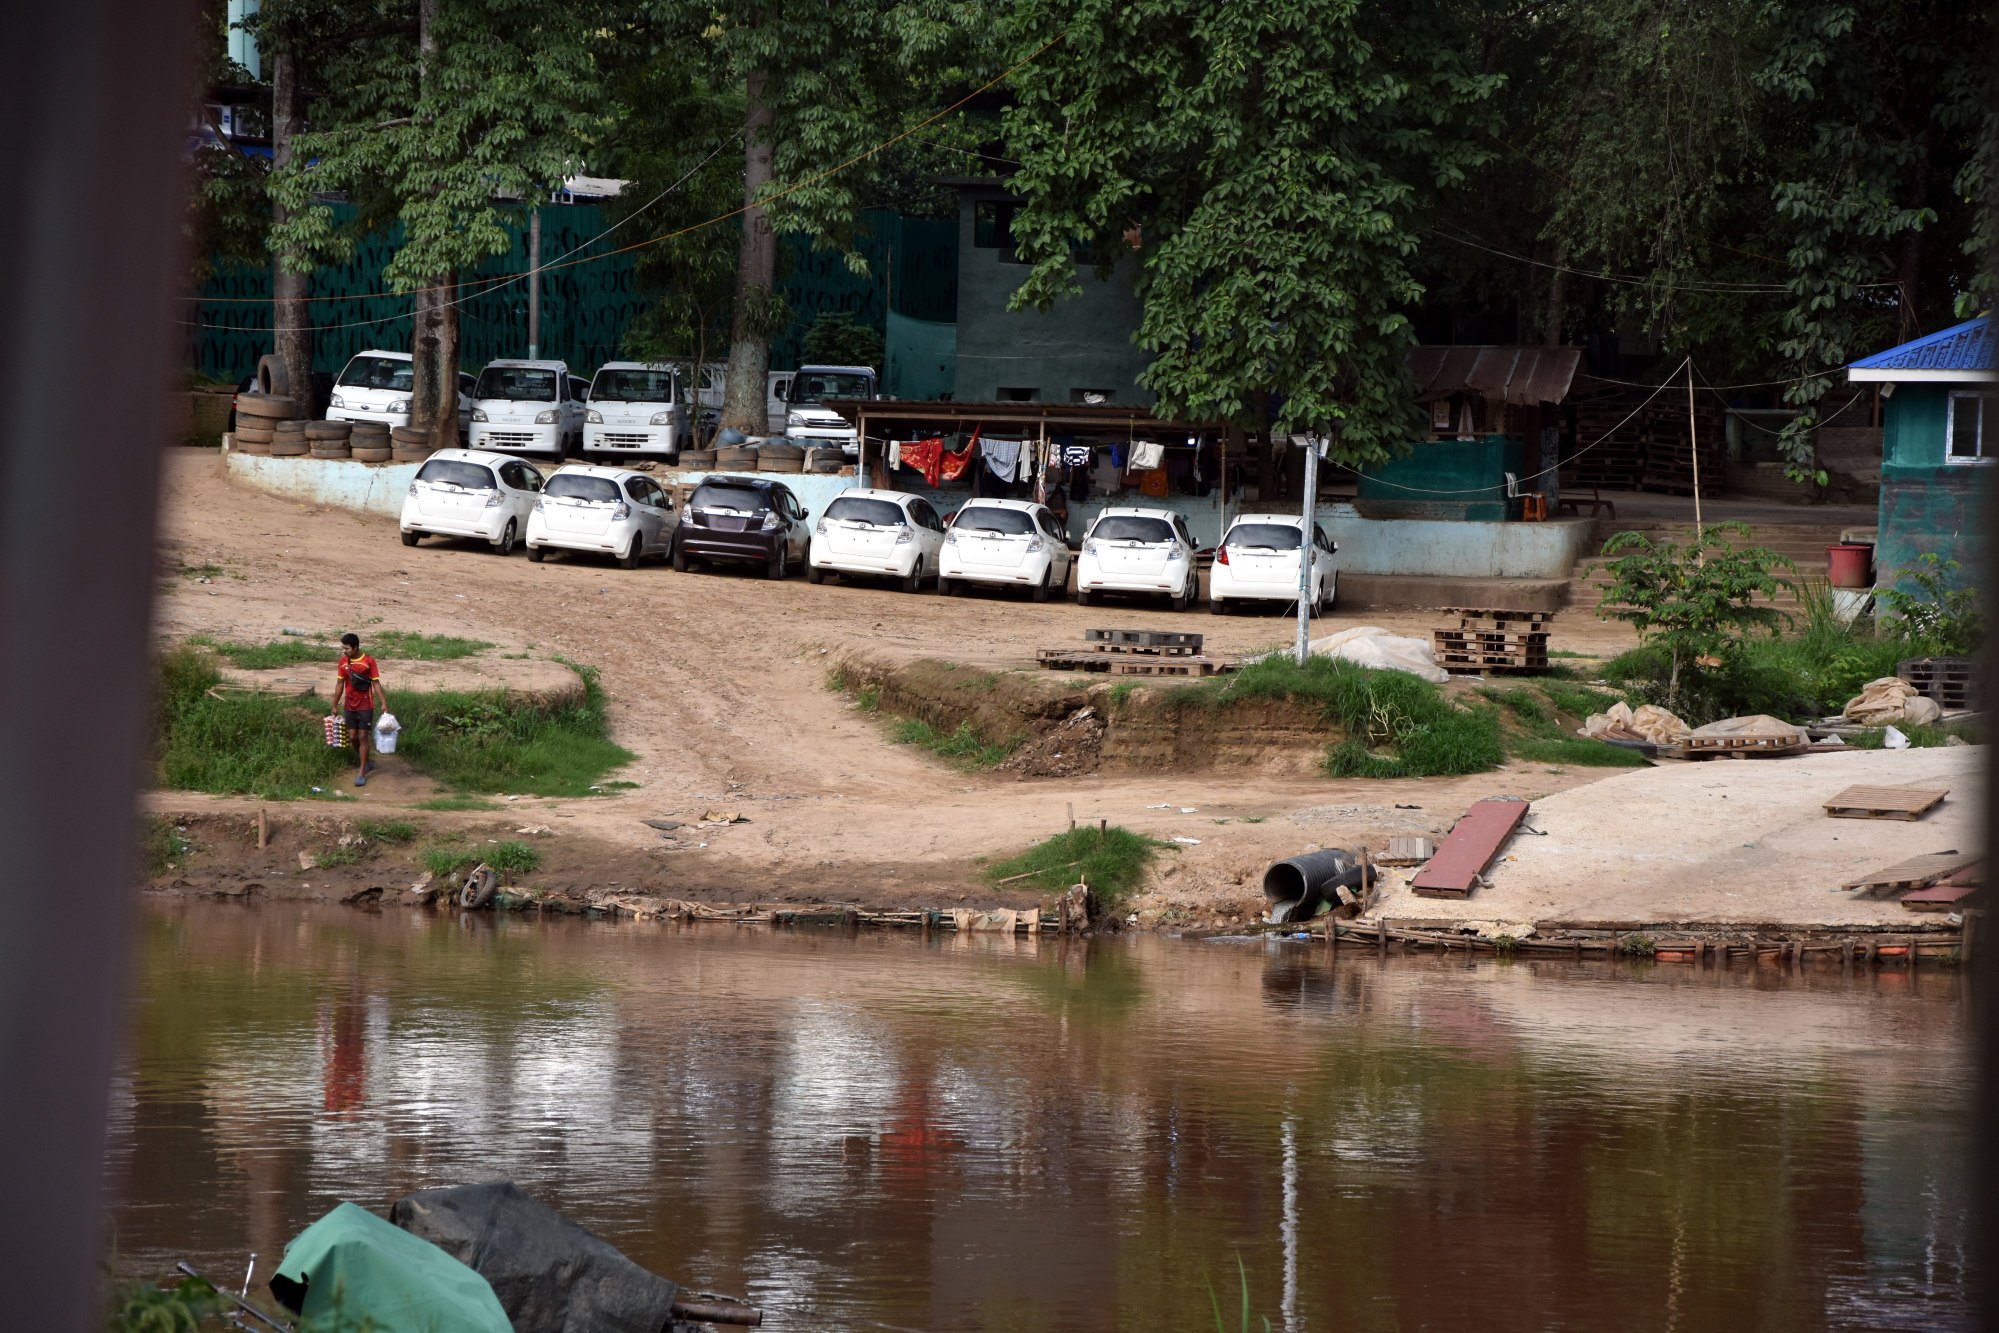 Smuggled cars await collection on the Myanmar bank of the Moei River, as seen from Thailand. Photo: Alastair McCready